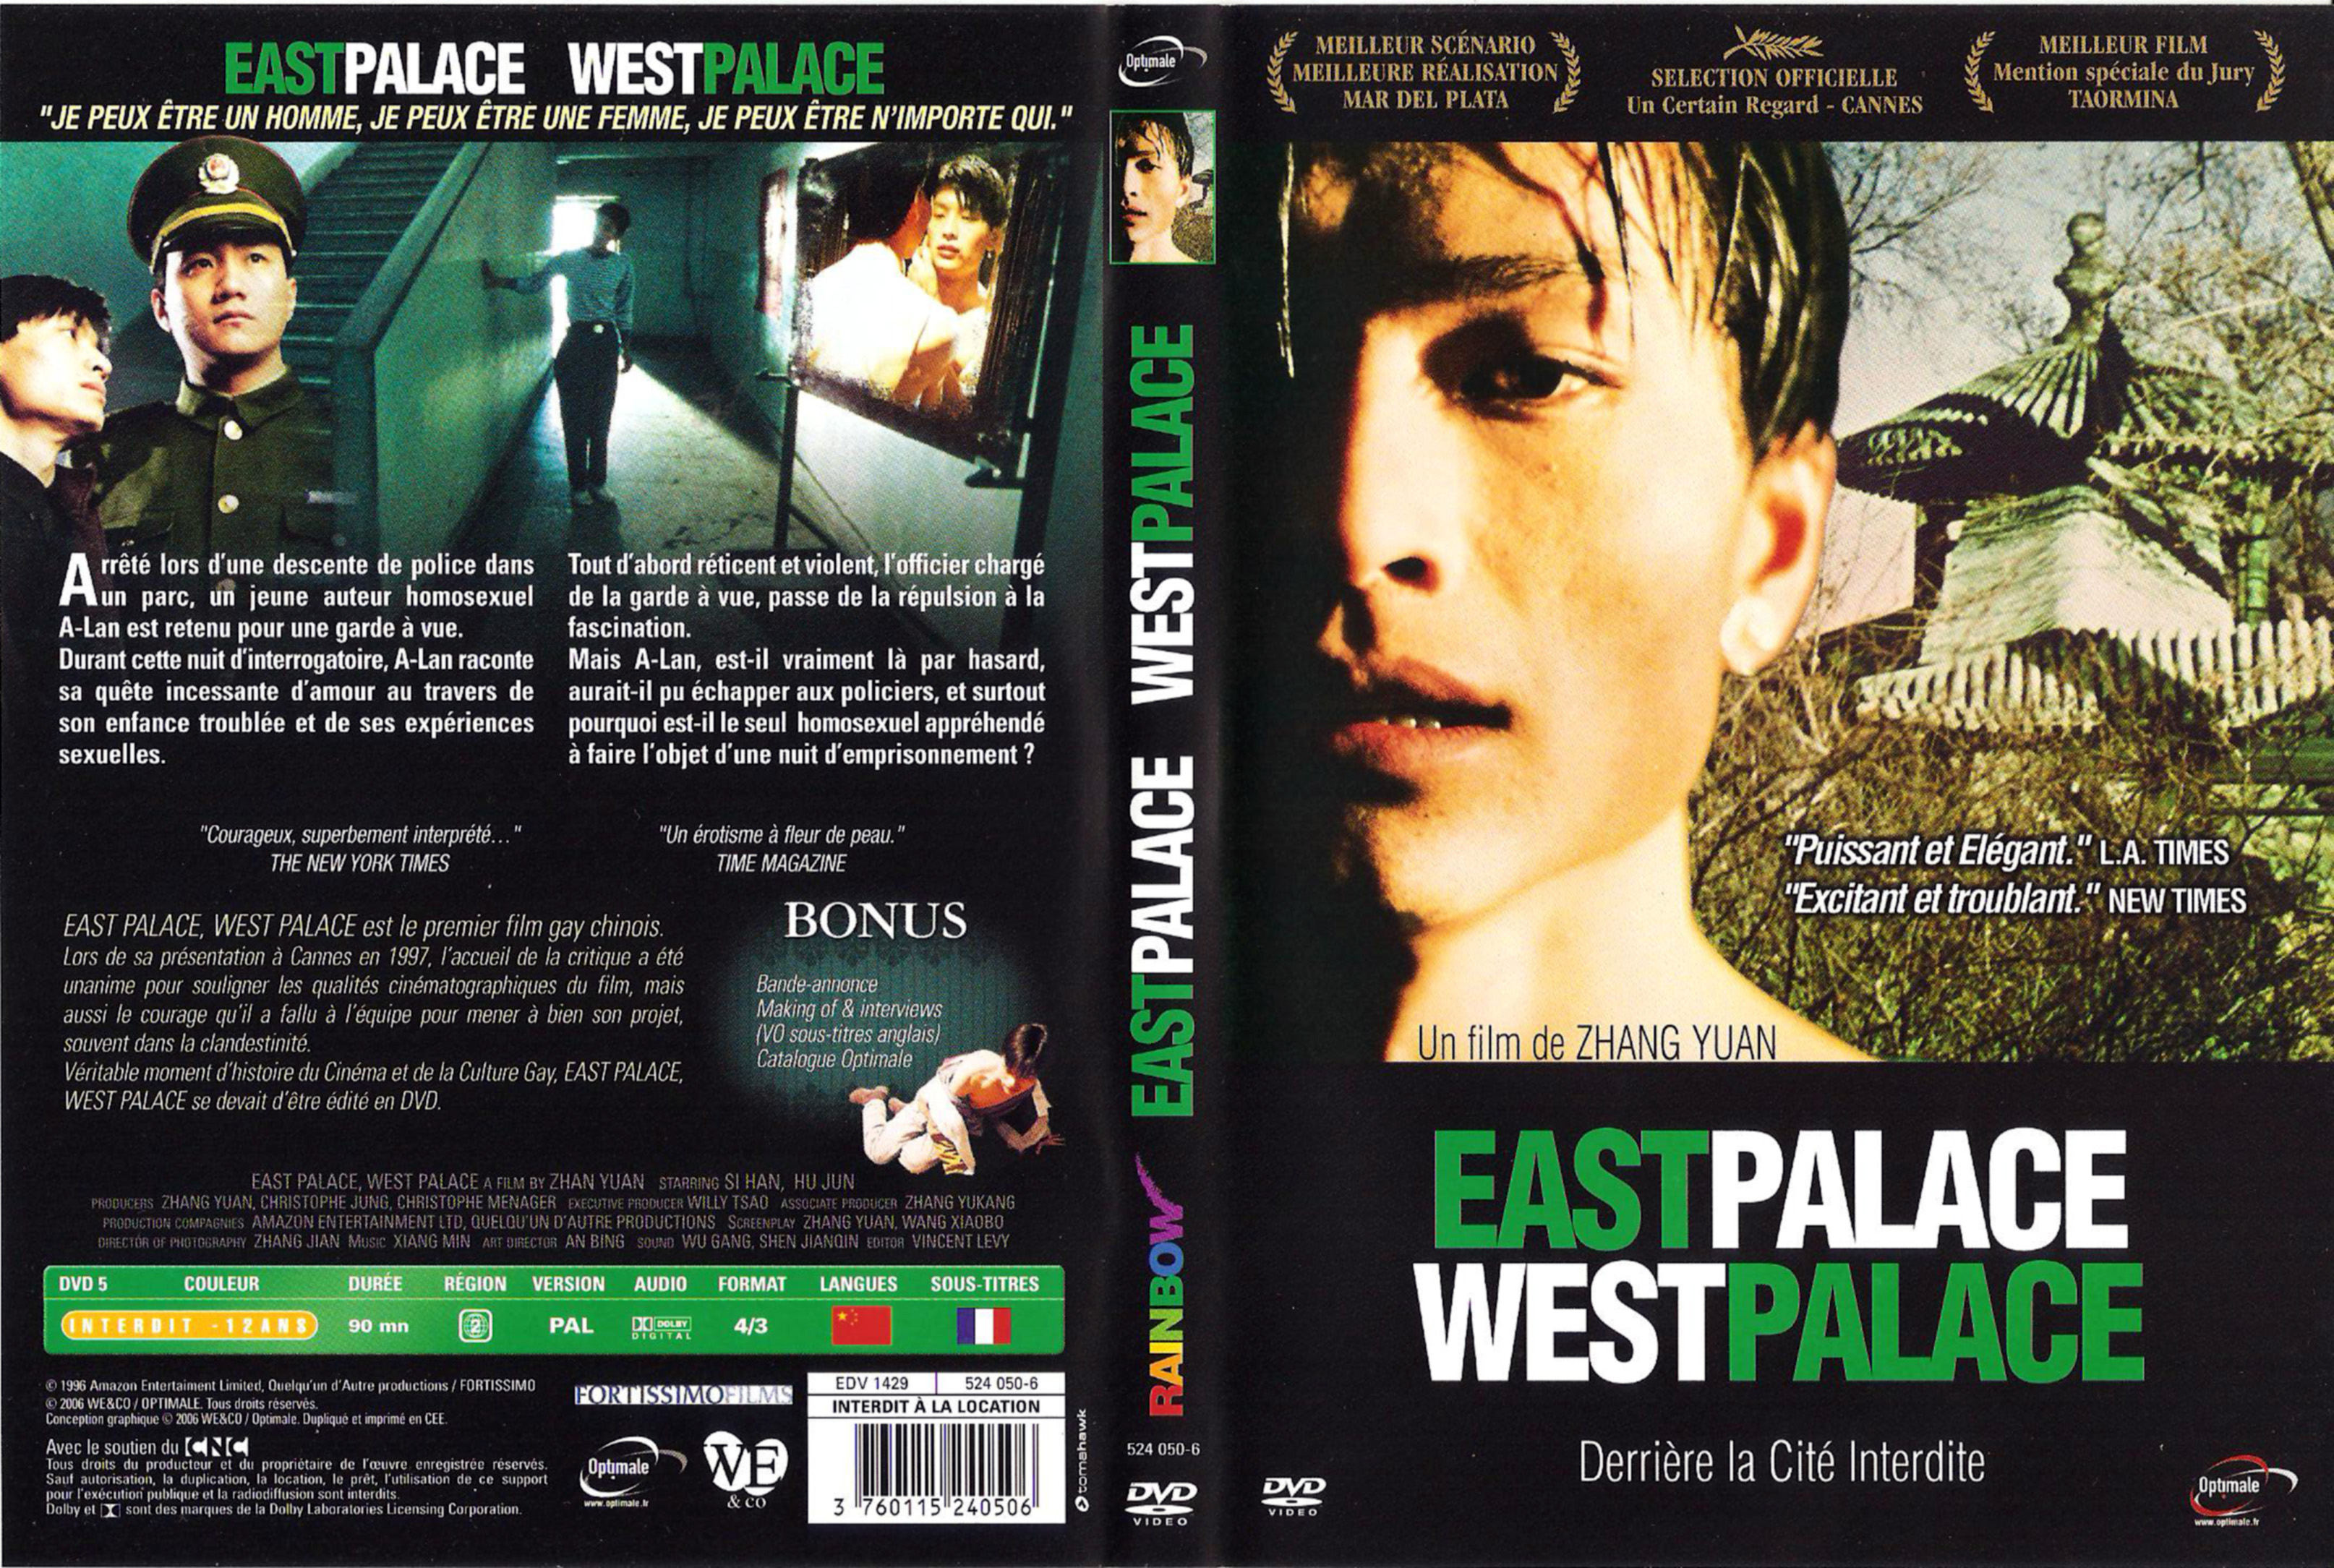 Jaquette DVD East palace west palace